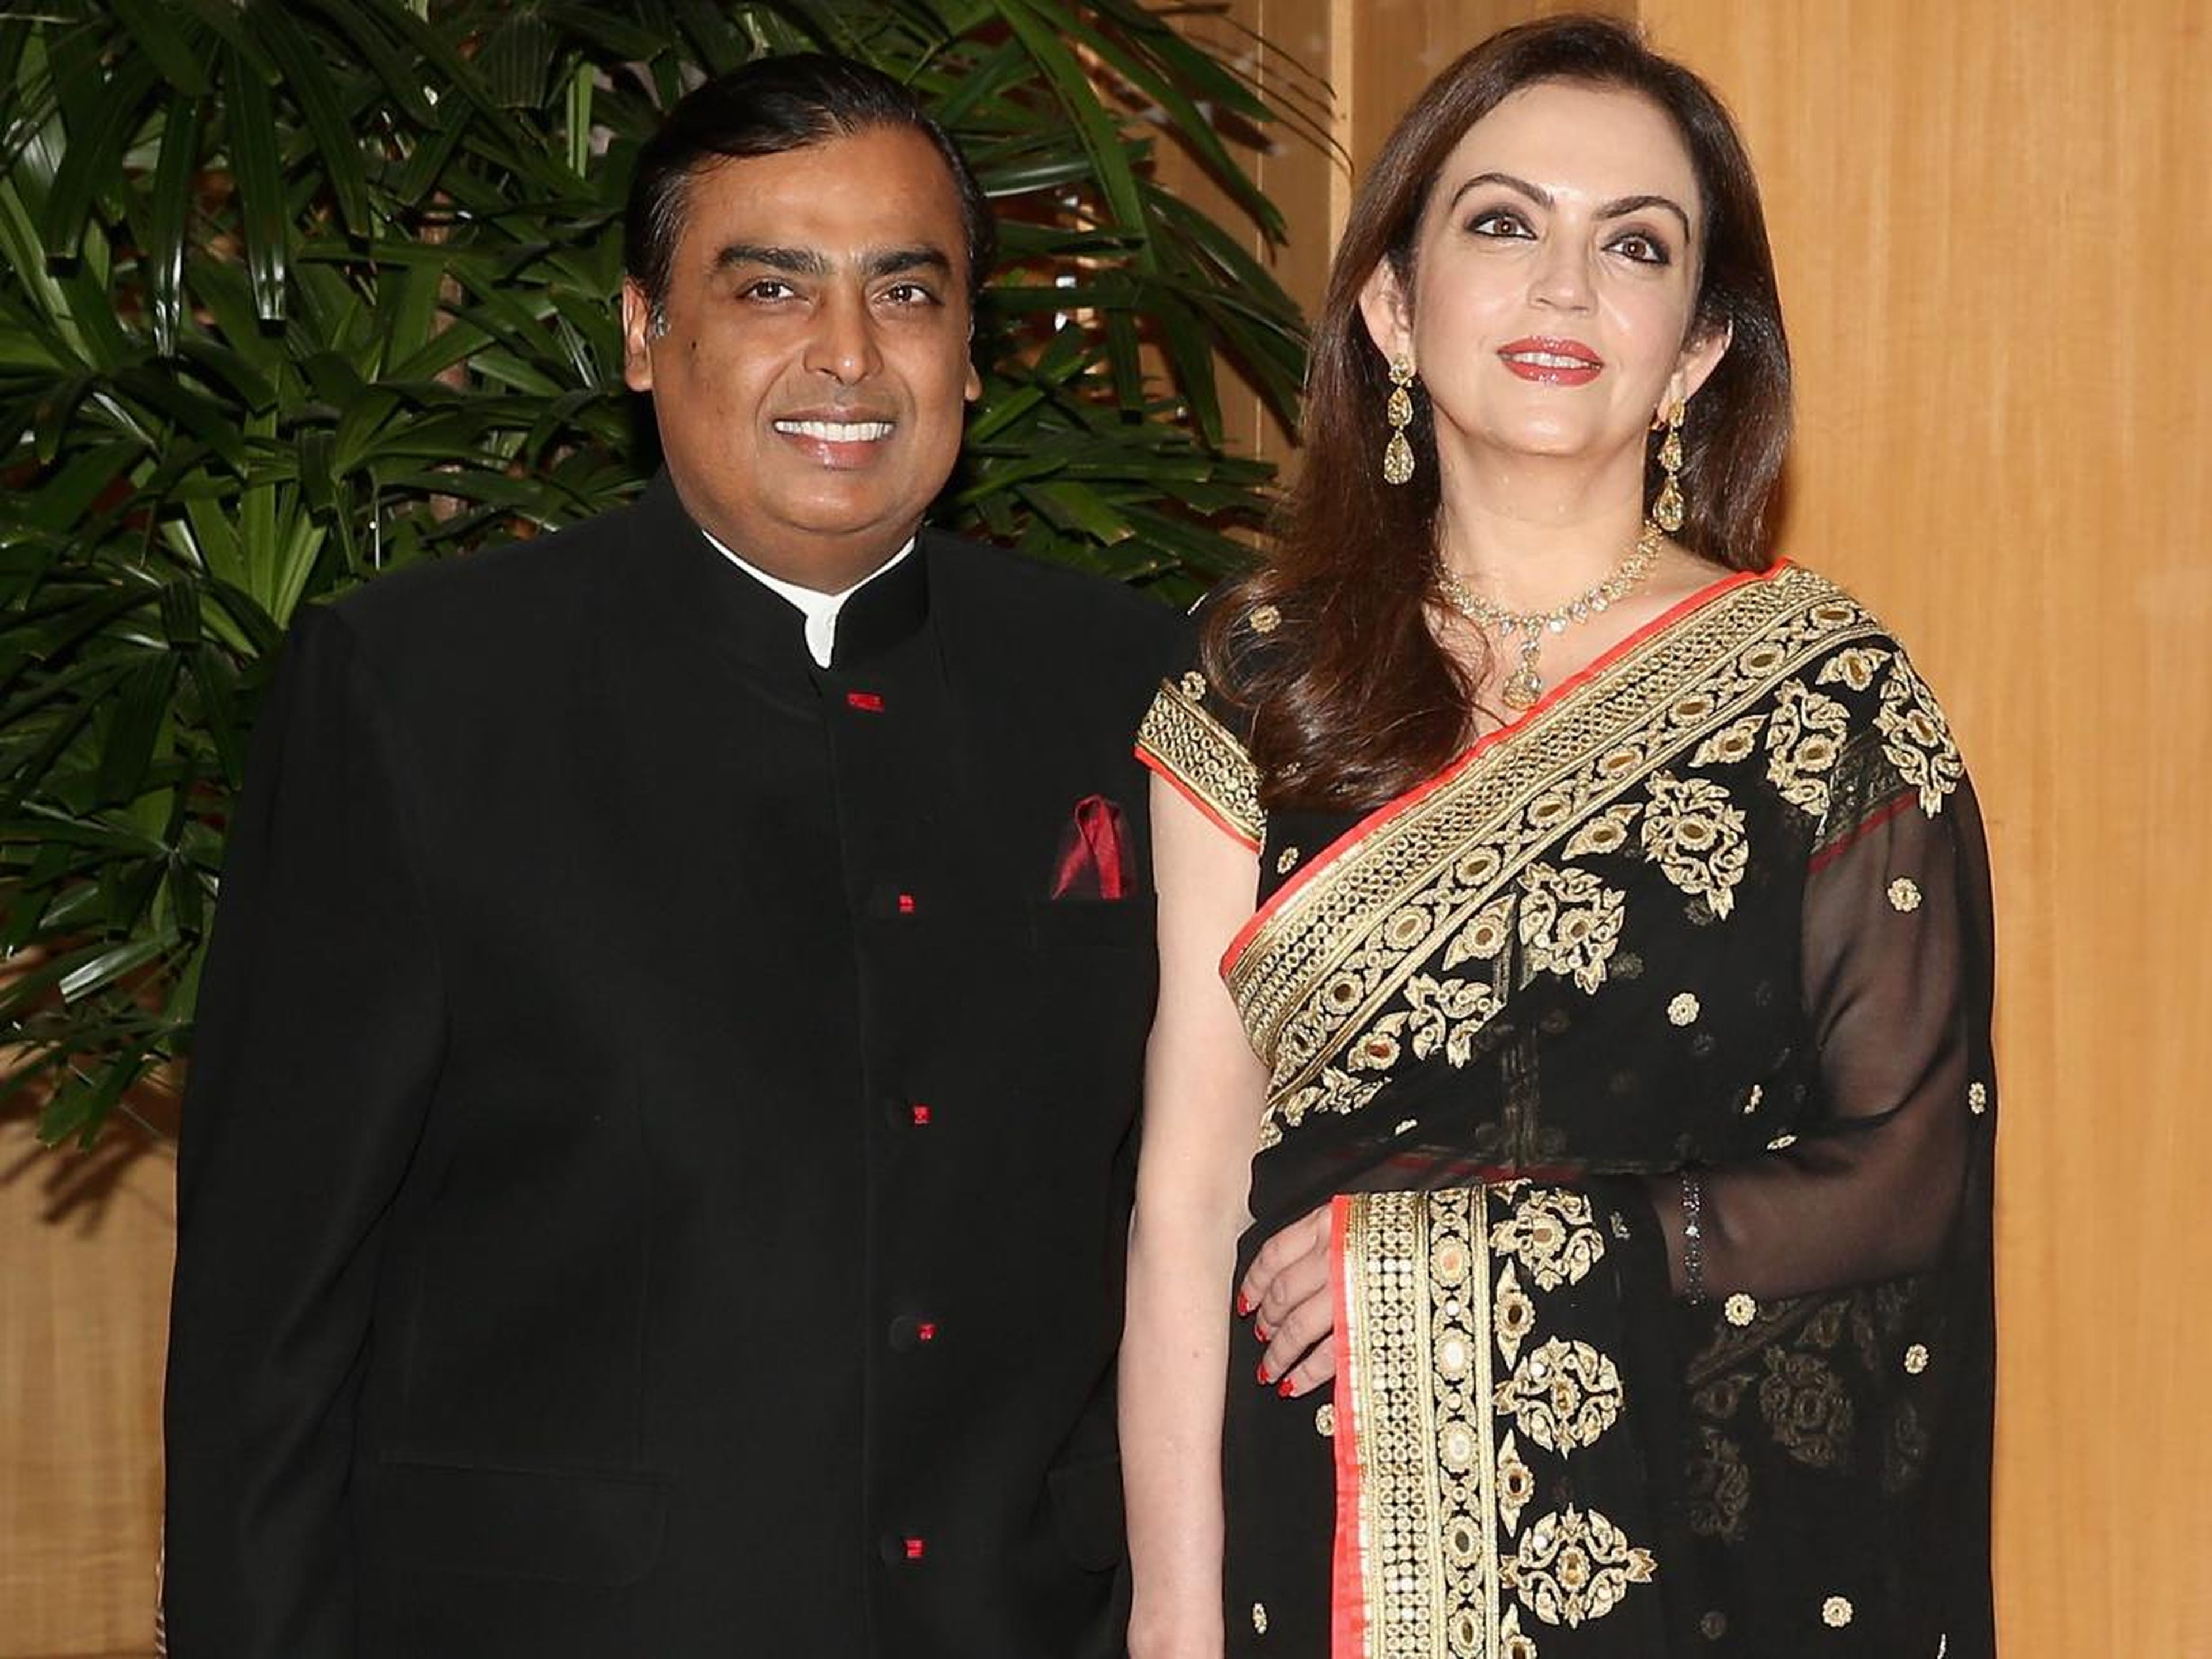 The wealth of the Ambani family seems poised to continue growing.